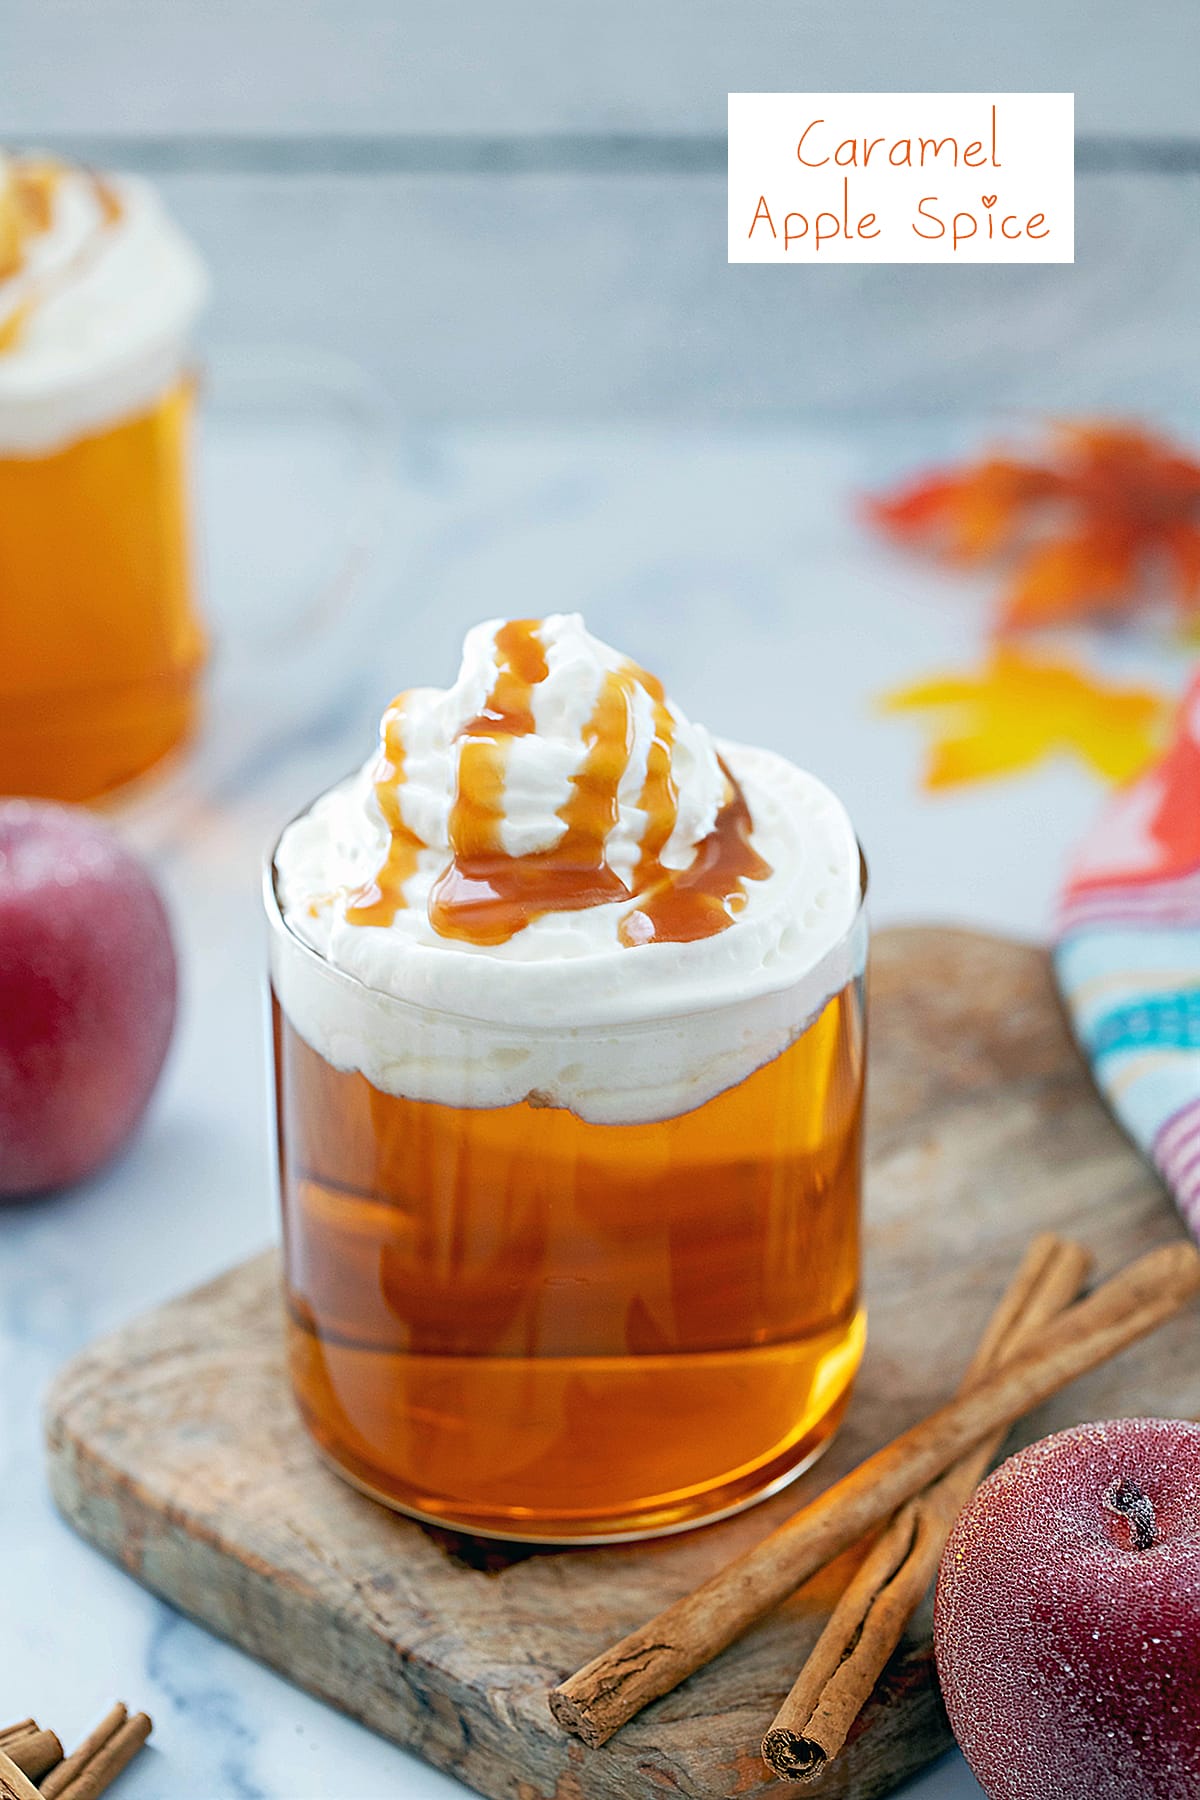 Caramel apple spice drink in a mug with whipped cream, caramel sauce, and cinnamon sticks and apples on the side with recipe title at top.